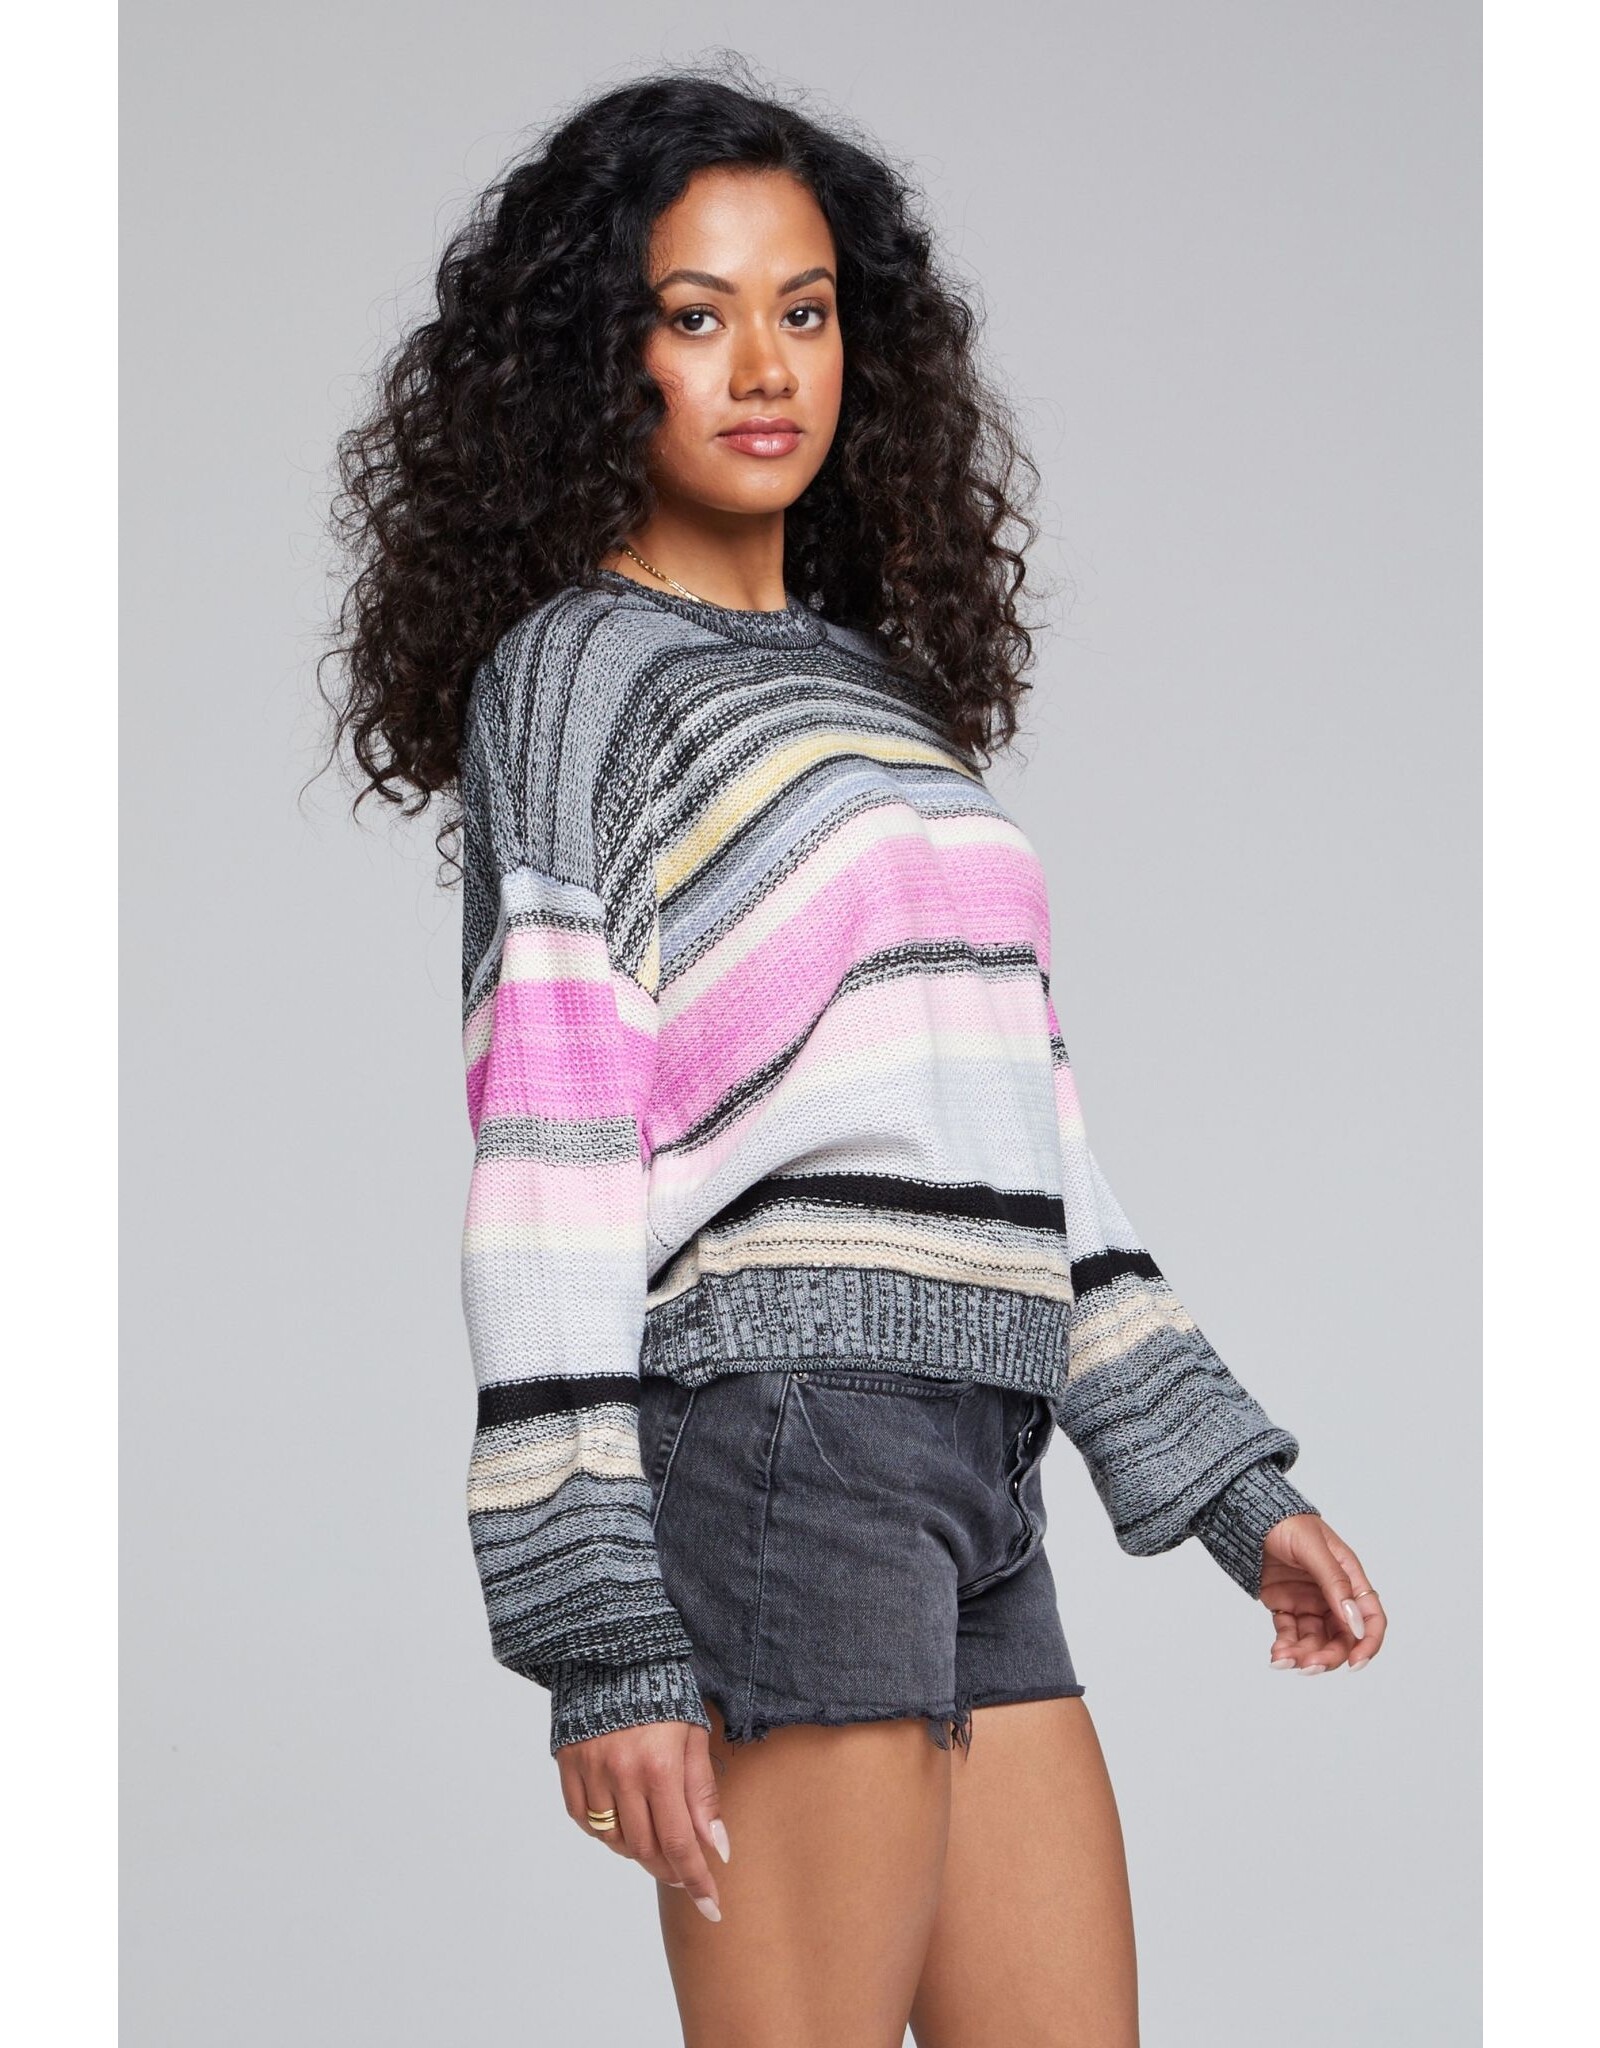 Saltwater luxe SWL Ollie Sweater